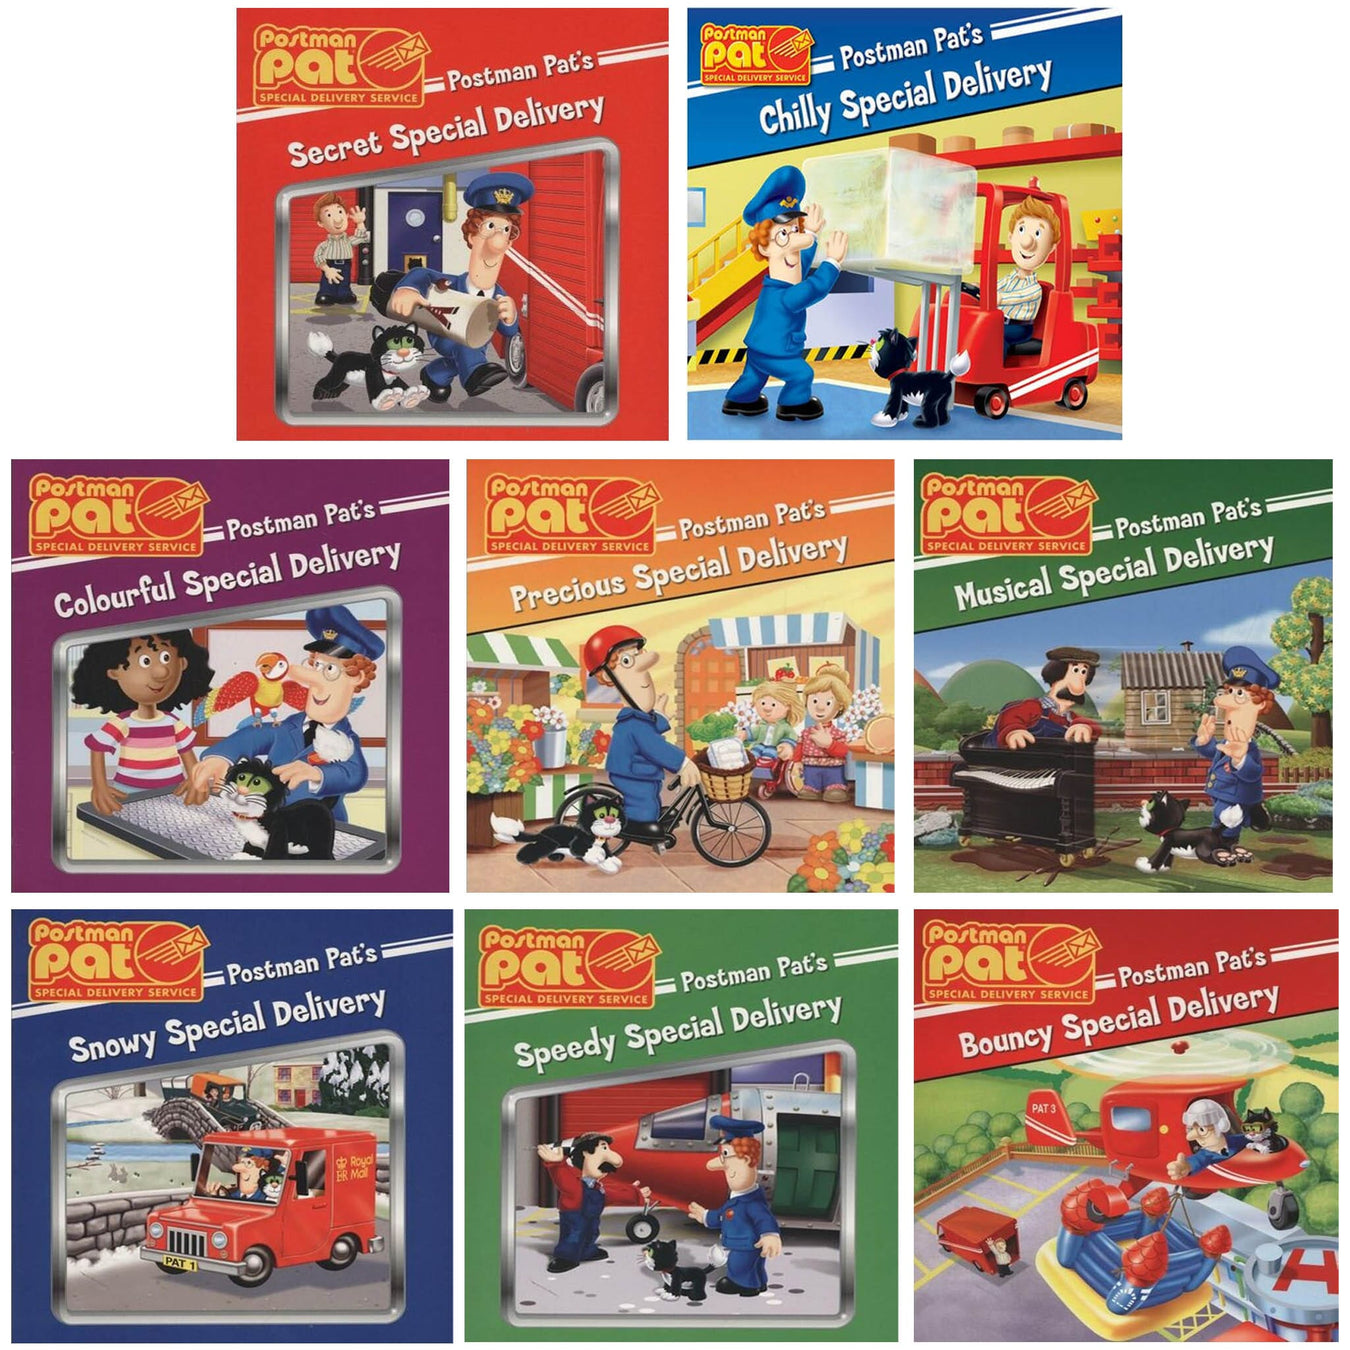 Postman Pat Special Delivery Service Series 8 Picture Books Collection Set - Ages 5-9 - Paperback 5-7 Egmont Publishing